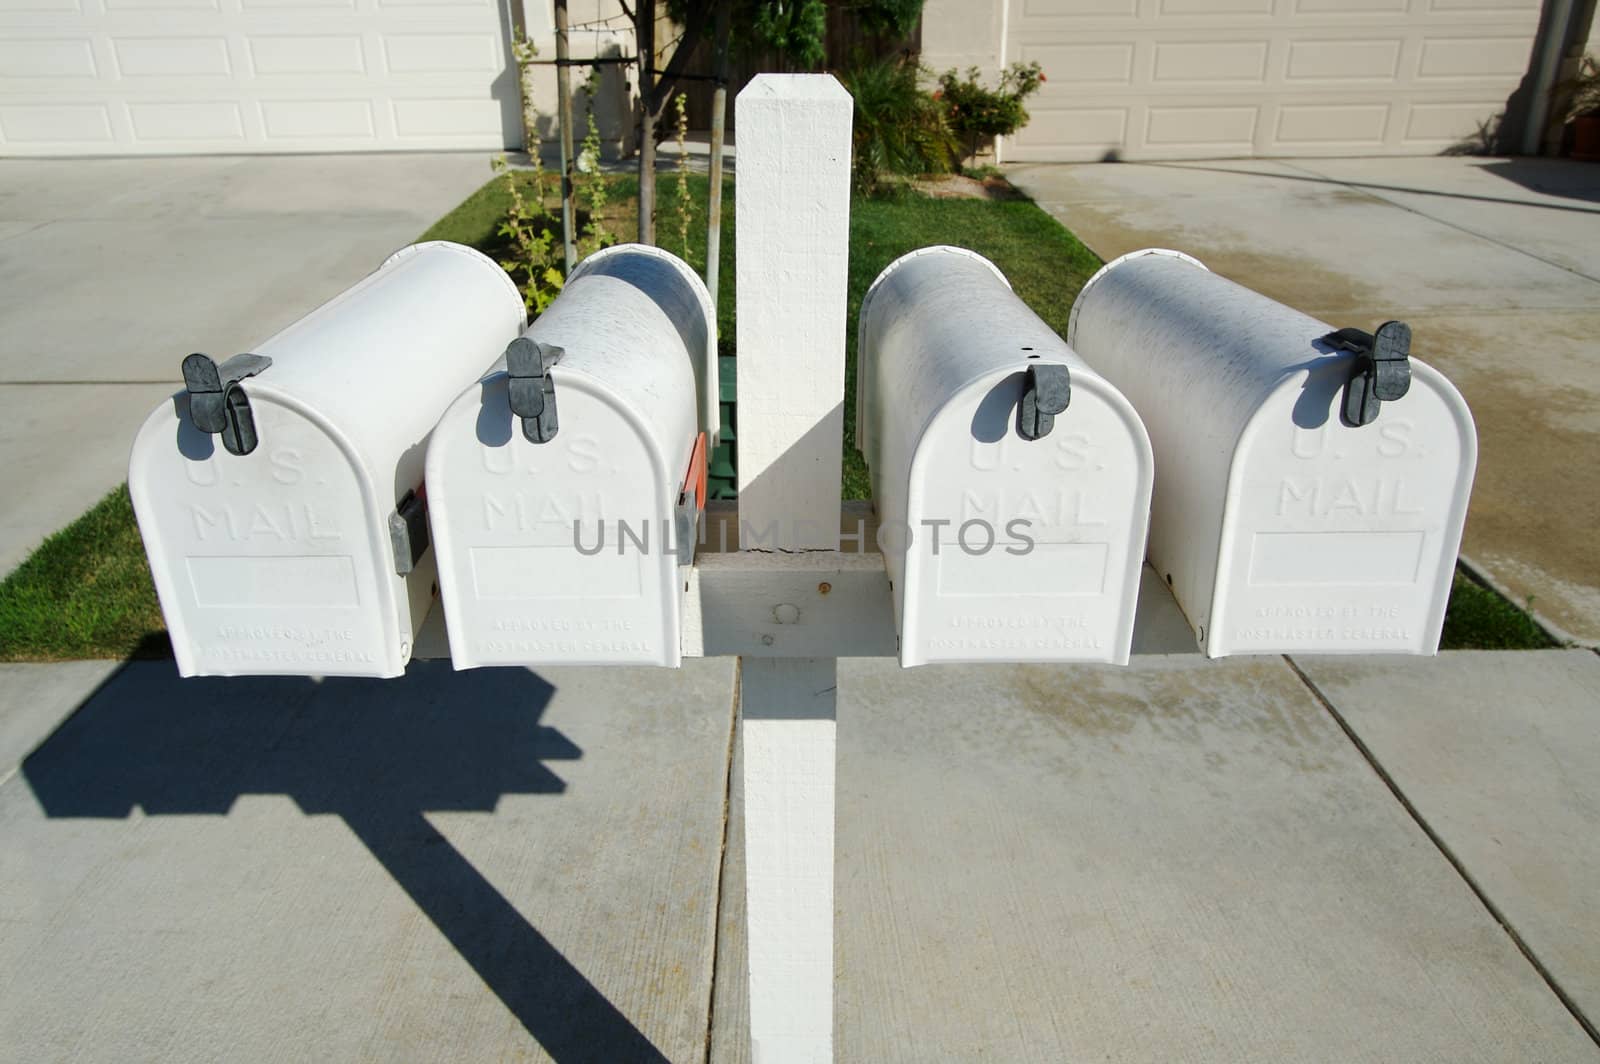 Row of Rural Mailboxes